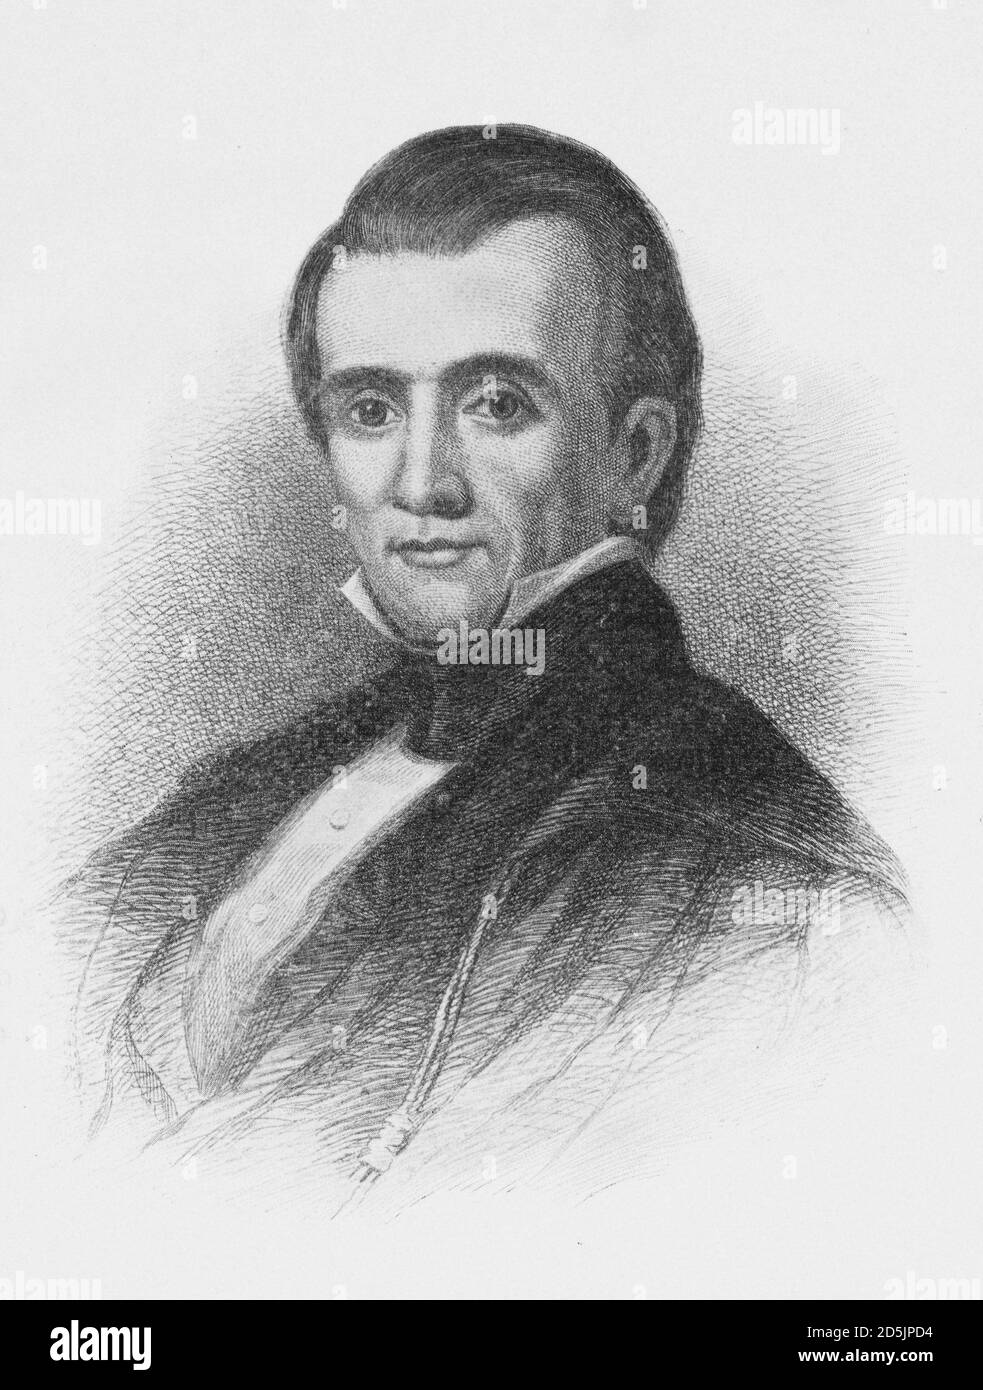 Portrait of president James Polk. James Knox Polk (1795 – 1849) was the 11th president of the United States, serving from 1845 to 1849. He previously Stock Photo